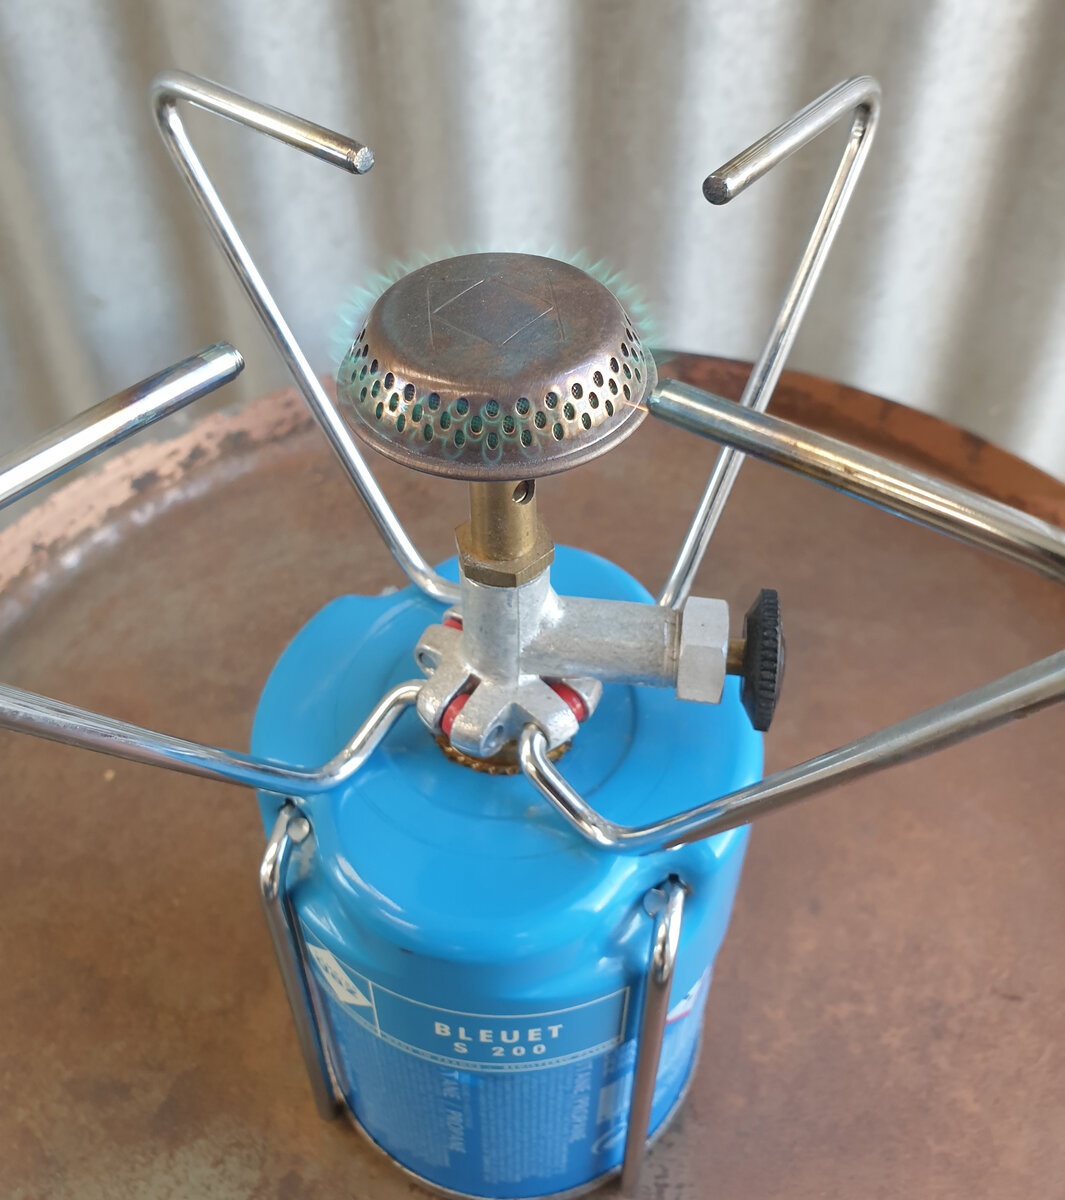 Camping gaz Portable camping gas stove new with box  Bleuet 200 